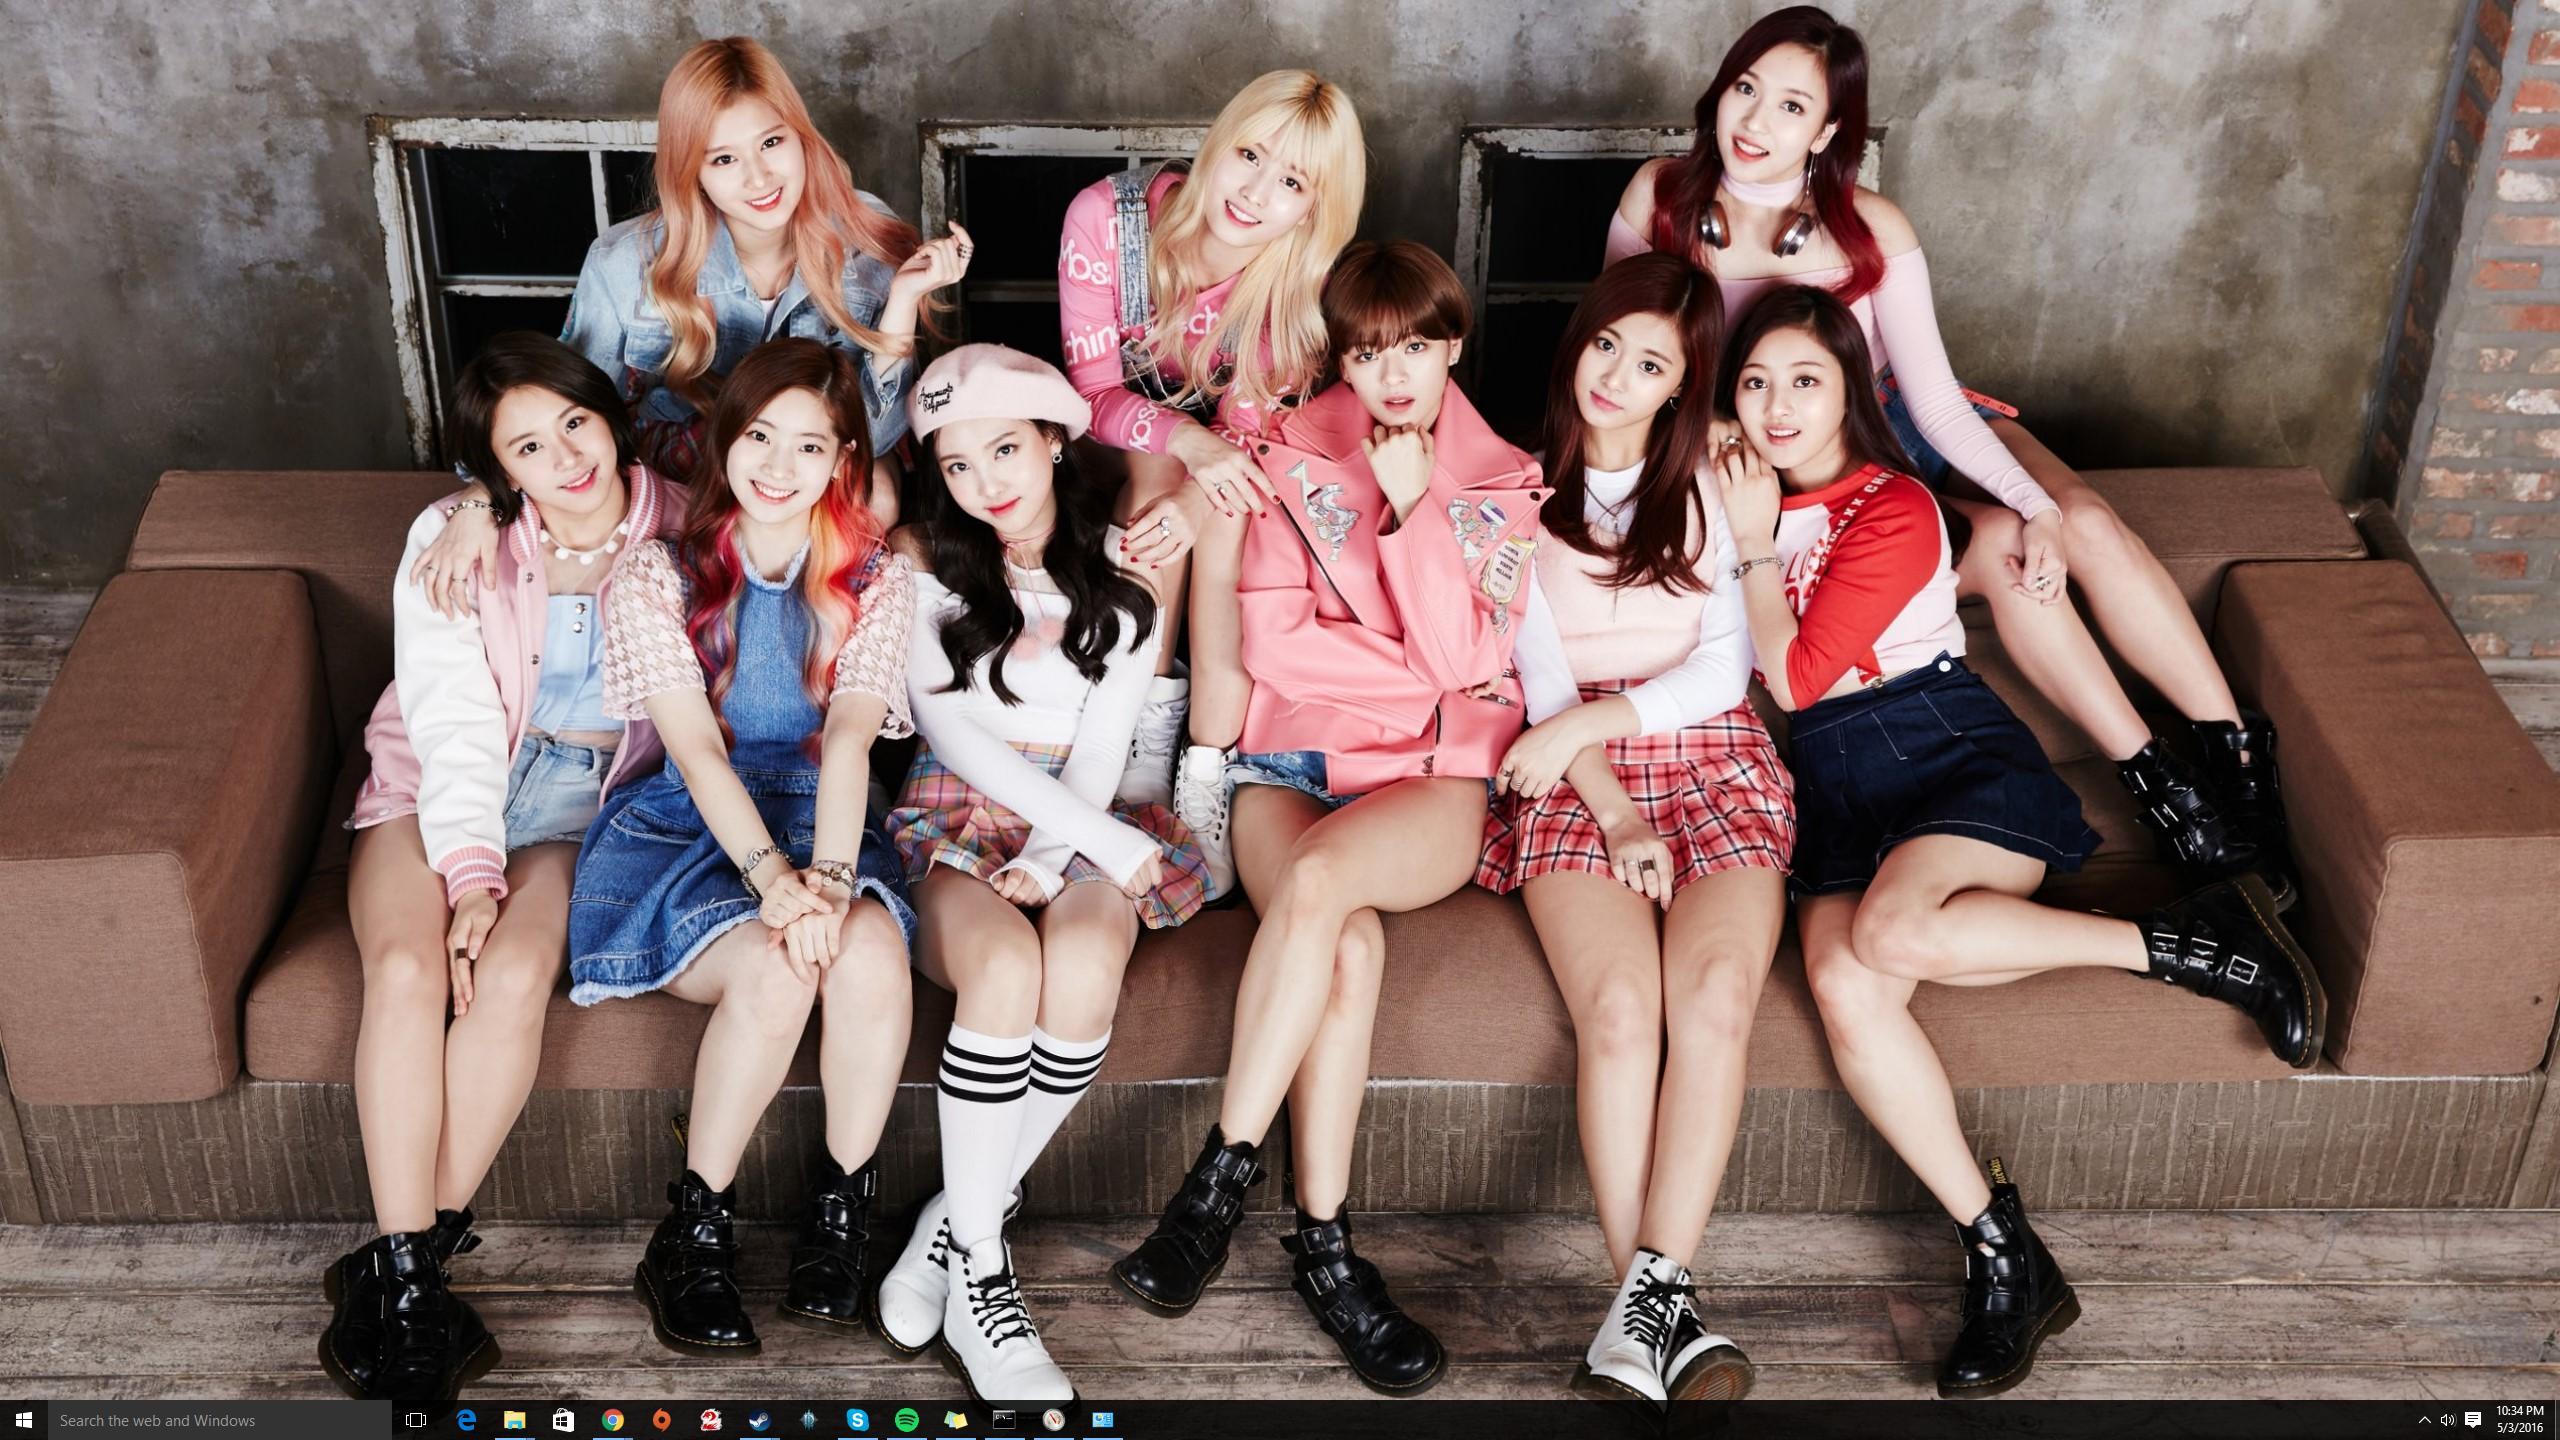 Post your twice wallpaper rn